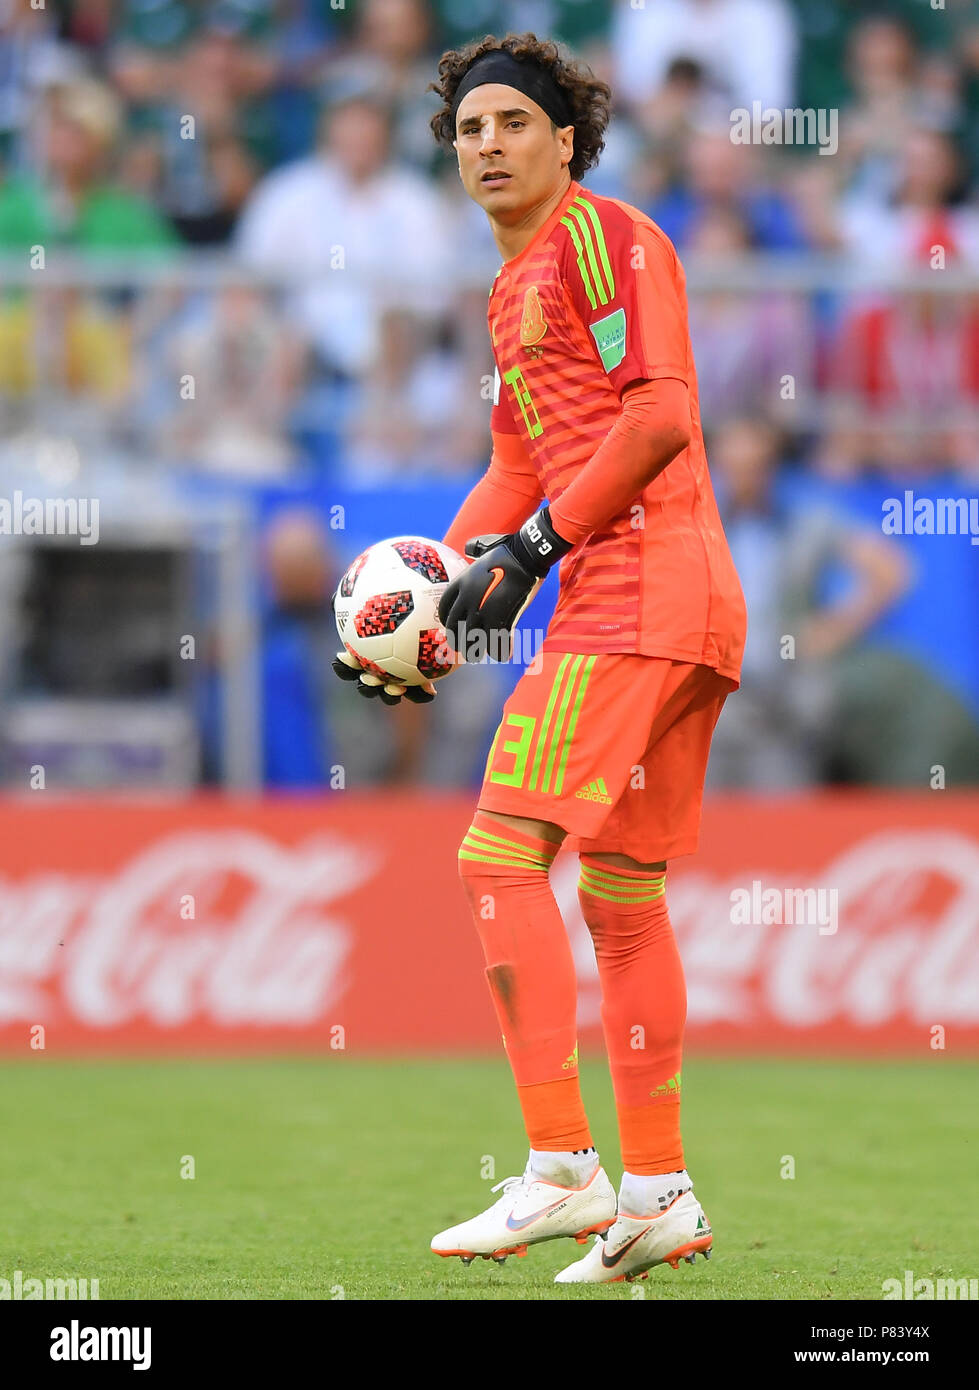 SAMARA, RUSSIA - JULY 02: Guillermo Ochoa of Mexico in action during the 2018 FIFA World Cup Russia Round of 16 match between Brazil and Mexico at Samara Arena on July 2, 2018 in Samara, Russia. (Photo by Lukasz Laskowski/PressFocus/MB Media) Stock Photo